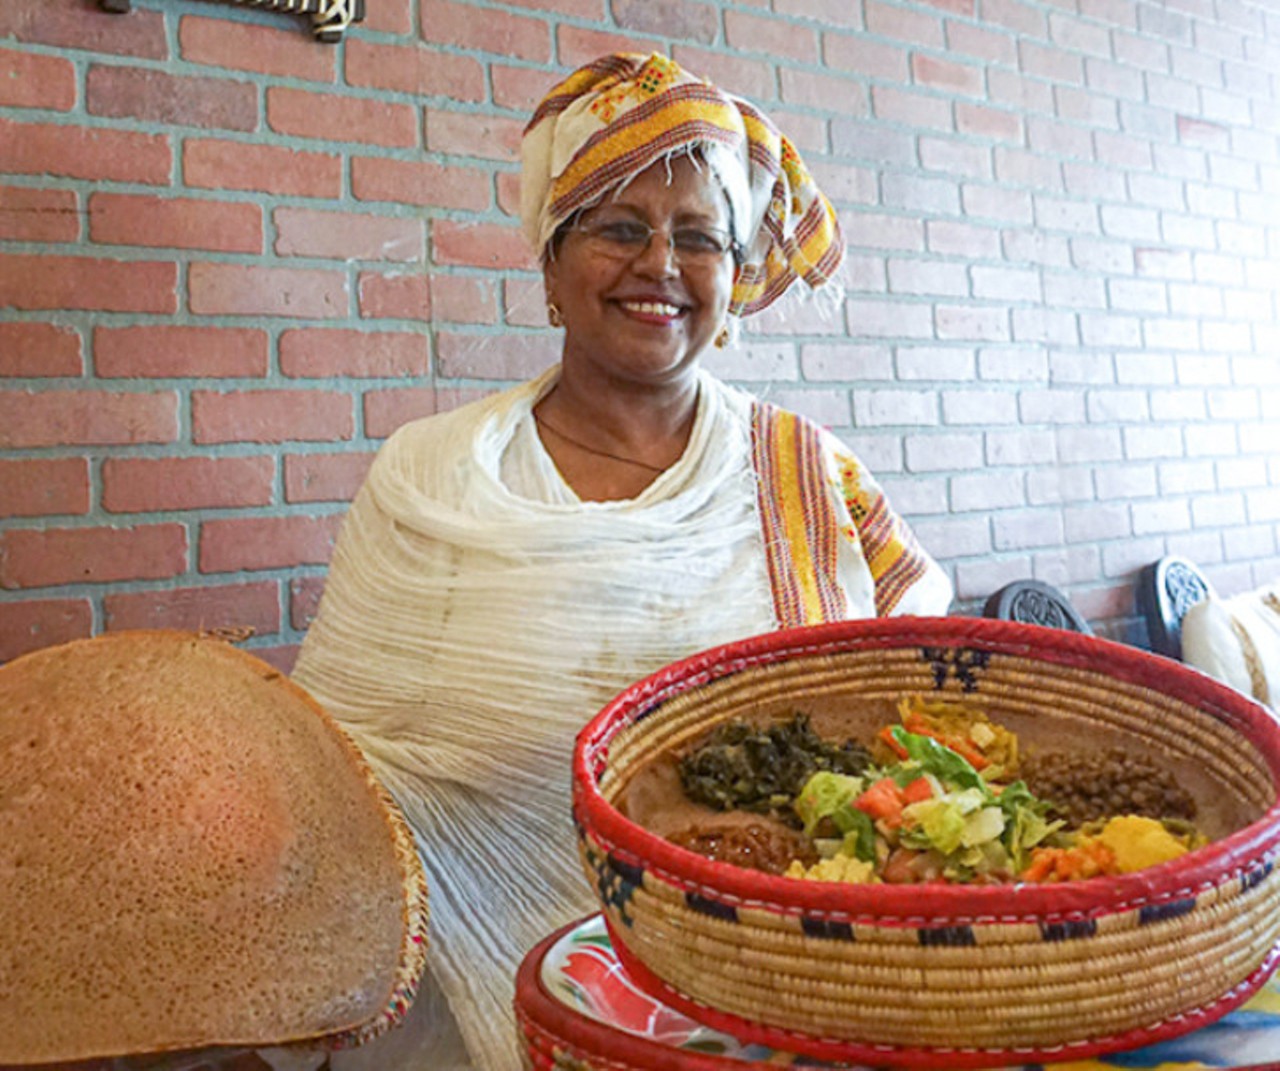 Queen of Sheba  
Seble Gizaw  
11001 N. 56th St., Temple Terrace
Queen of Sheba serves up traditional Ethiopian food from tibs wot to beef sambussa. Since Ethiopia is the birthplace of coffee, the restaurant also offers traditional coffee ceremonies for two or four people. Seble Gizaw came to the U.S. from Ethiopia in 1991 and opened Queen of Sheba in January of 2008.
Photo via Alexandria Jones